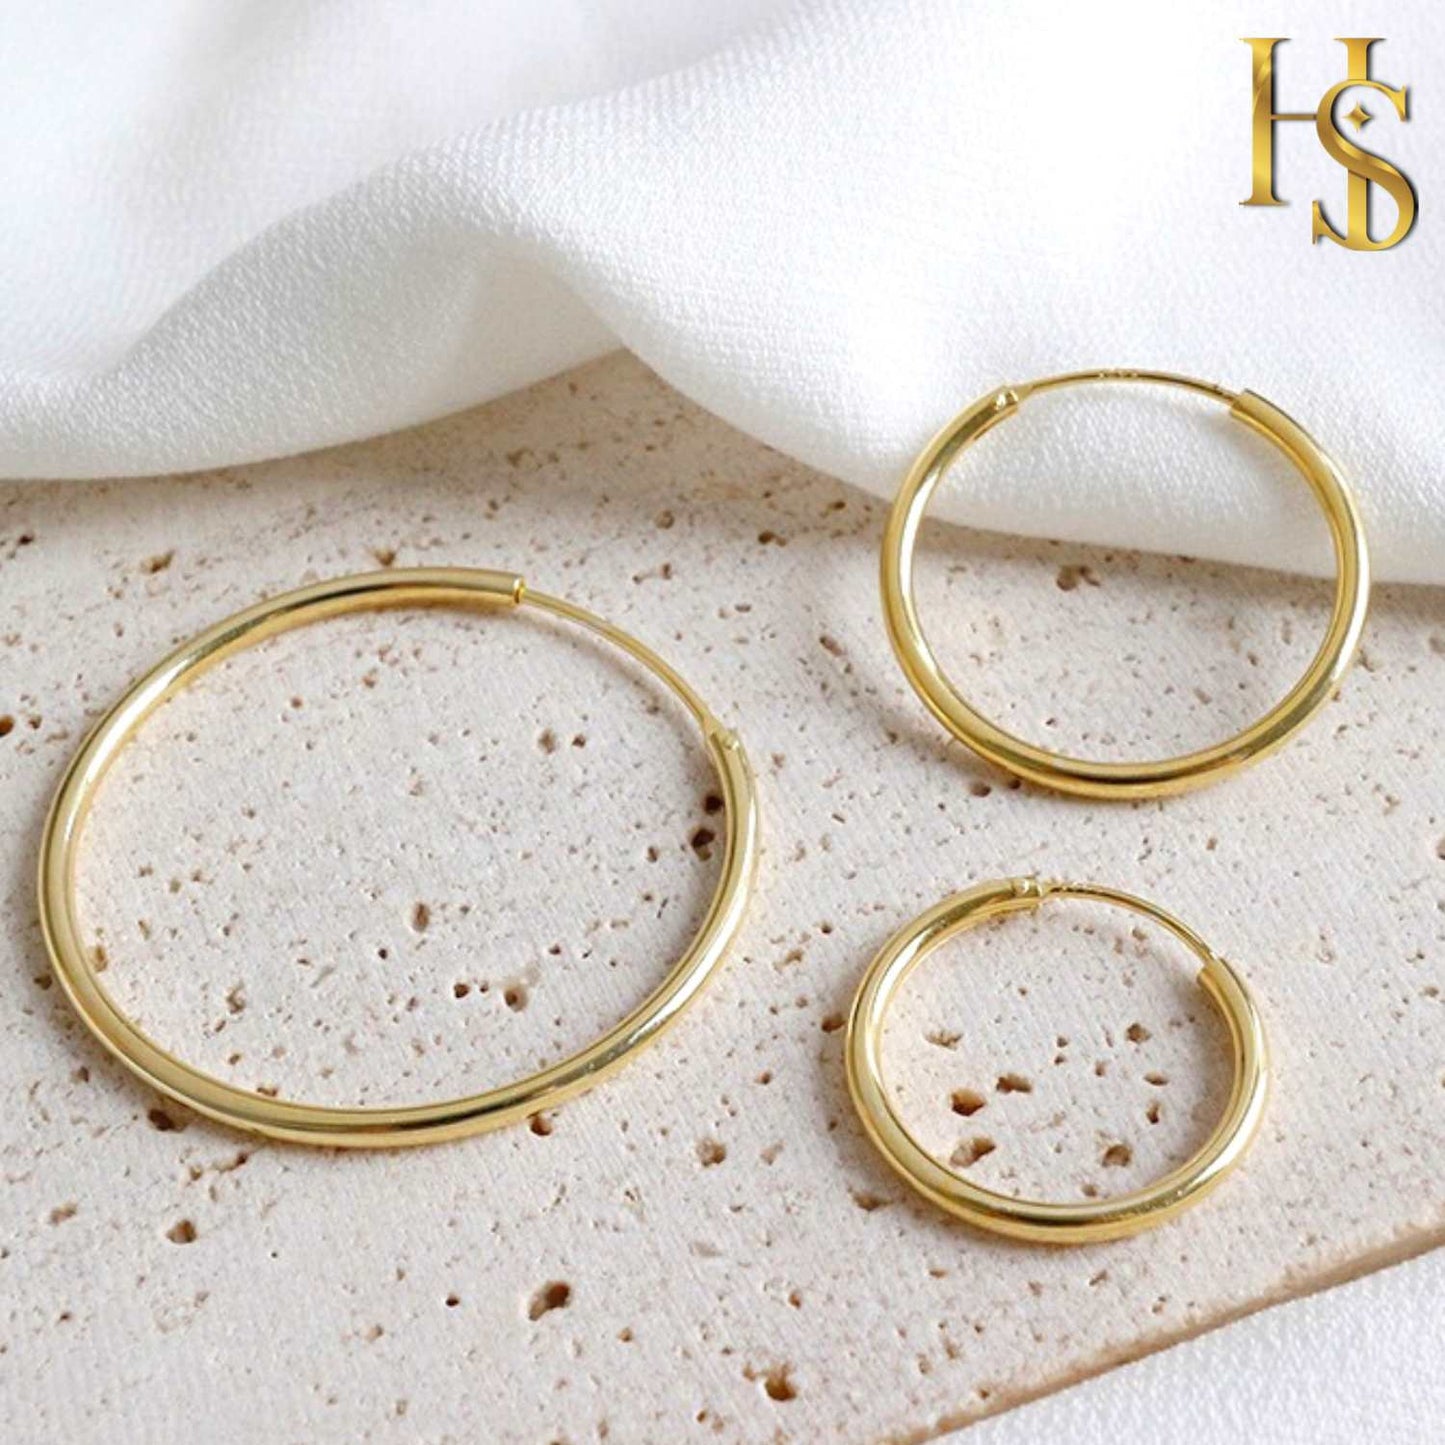 Classic Gold Hoop Earrings in 92.5 Silver - 1.2mm Thickness - Small Sizes 10mm to 20mm -  18K Gold finish